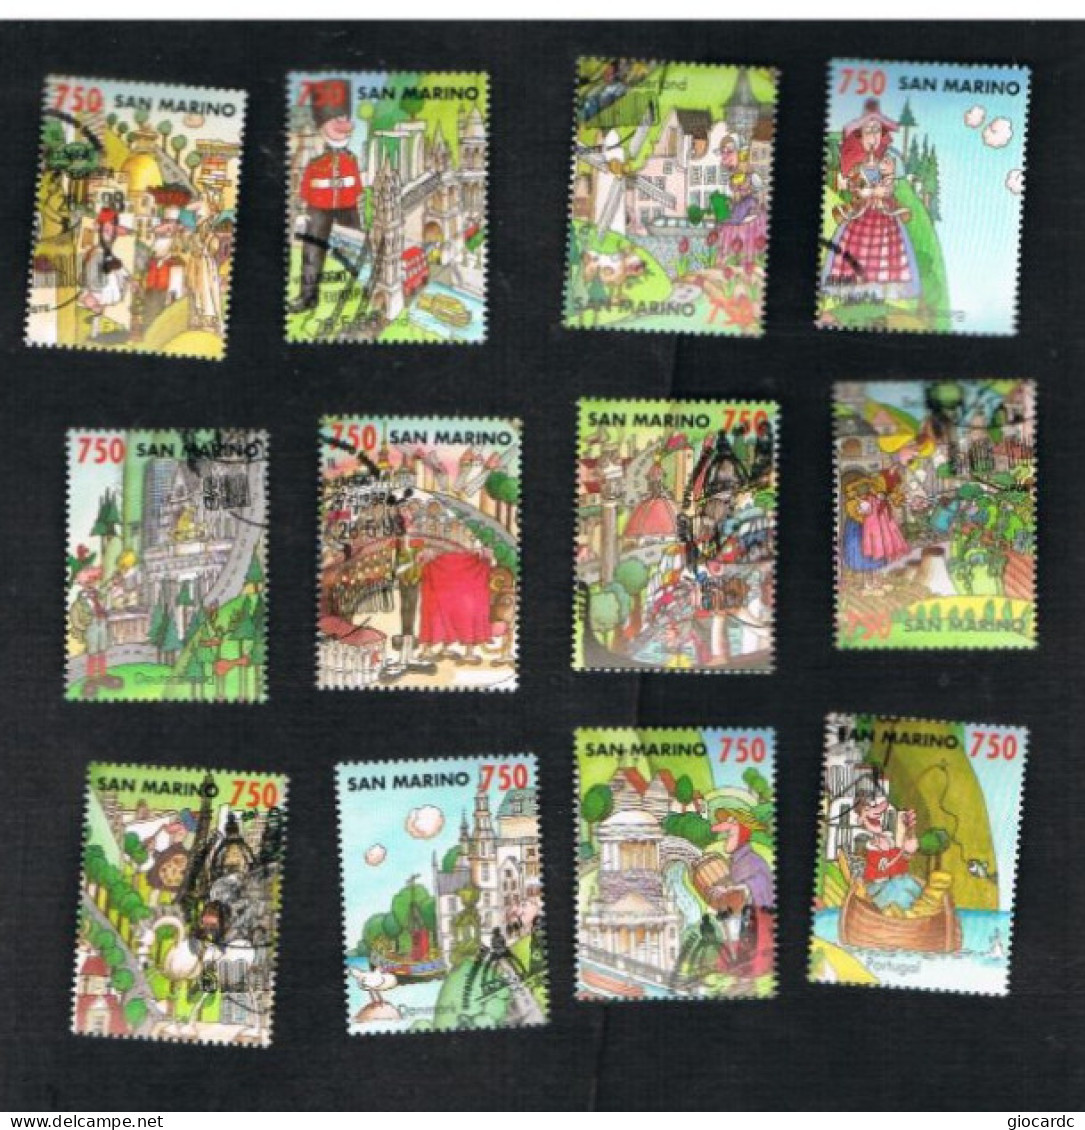 SAN MARINO - UN 1382.1393 - 1993 IL VILLAGGIO EUROPA (COMPLET SET OF 12 STAMPS, BY BF)     -  USED - Used Stamps